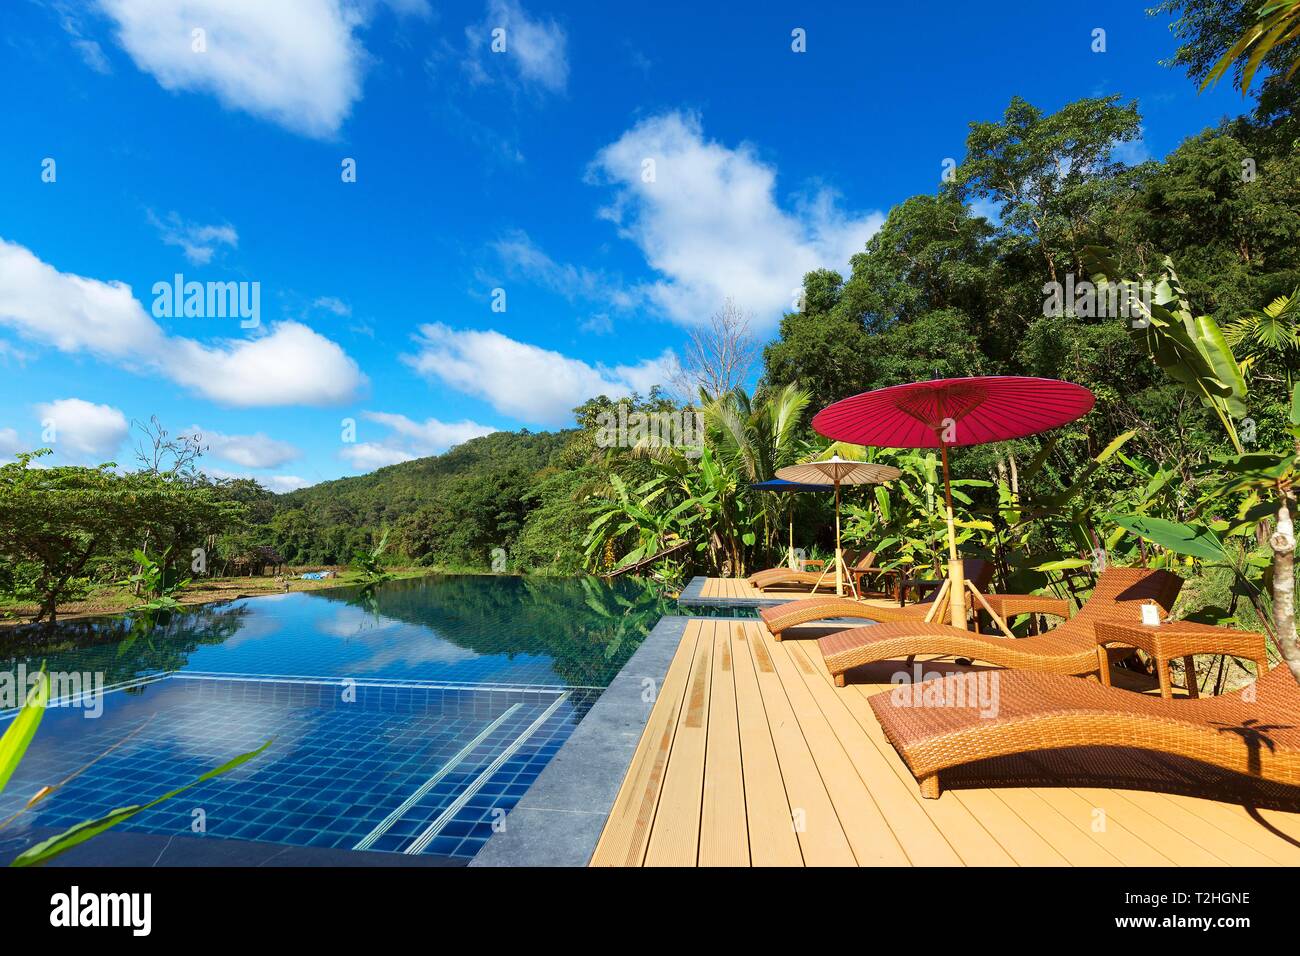 Swimming pool with sunbeds and umbrellas, Fearn Resort, Mae Hong Son, Thailand Stock Photo